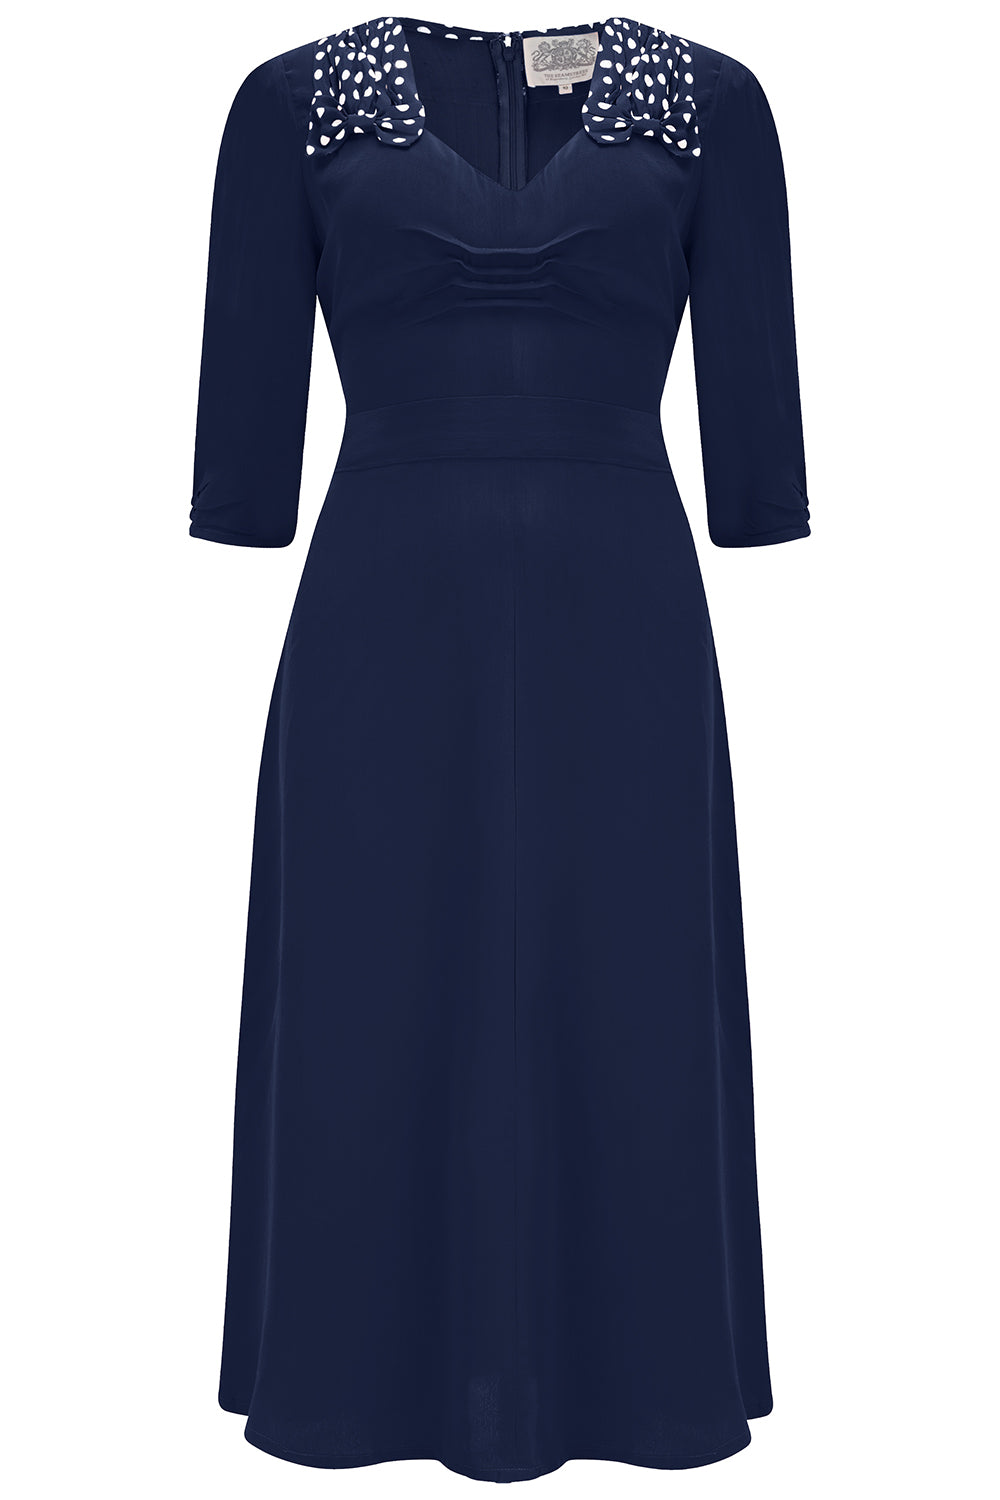 1940s Evening, Prom, Party, Formal, Ball Gowns Veronica French Navy A Classic 1940s Inspired Vintage Style By The Seamstress Of Bloomsbury £89.95 AT vintagedancer.com